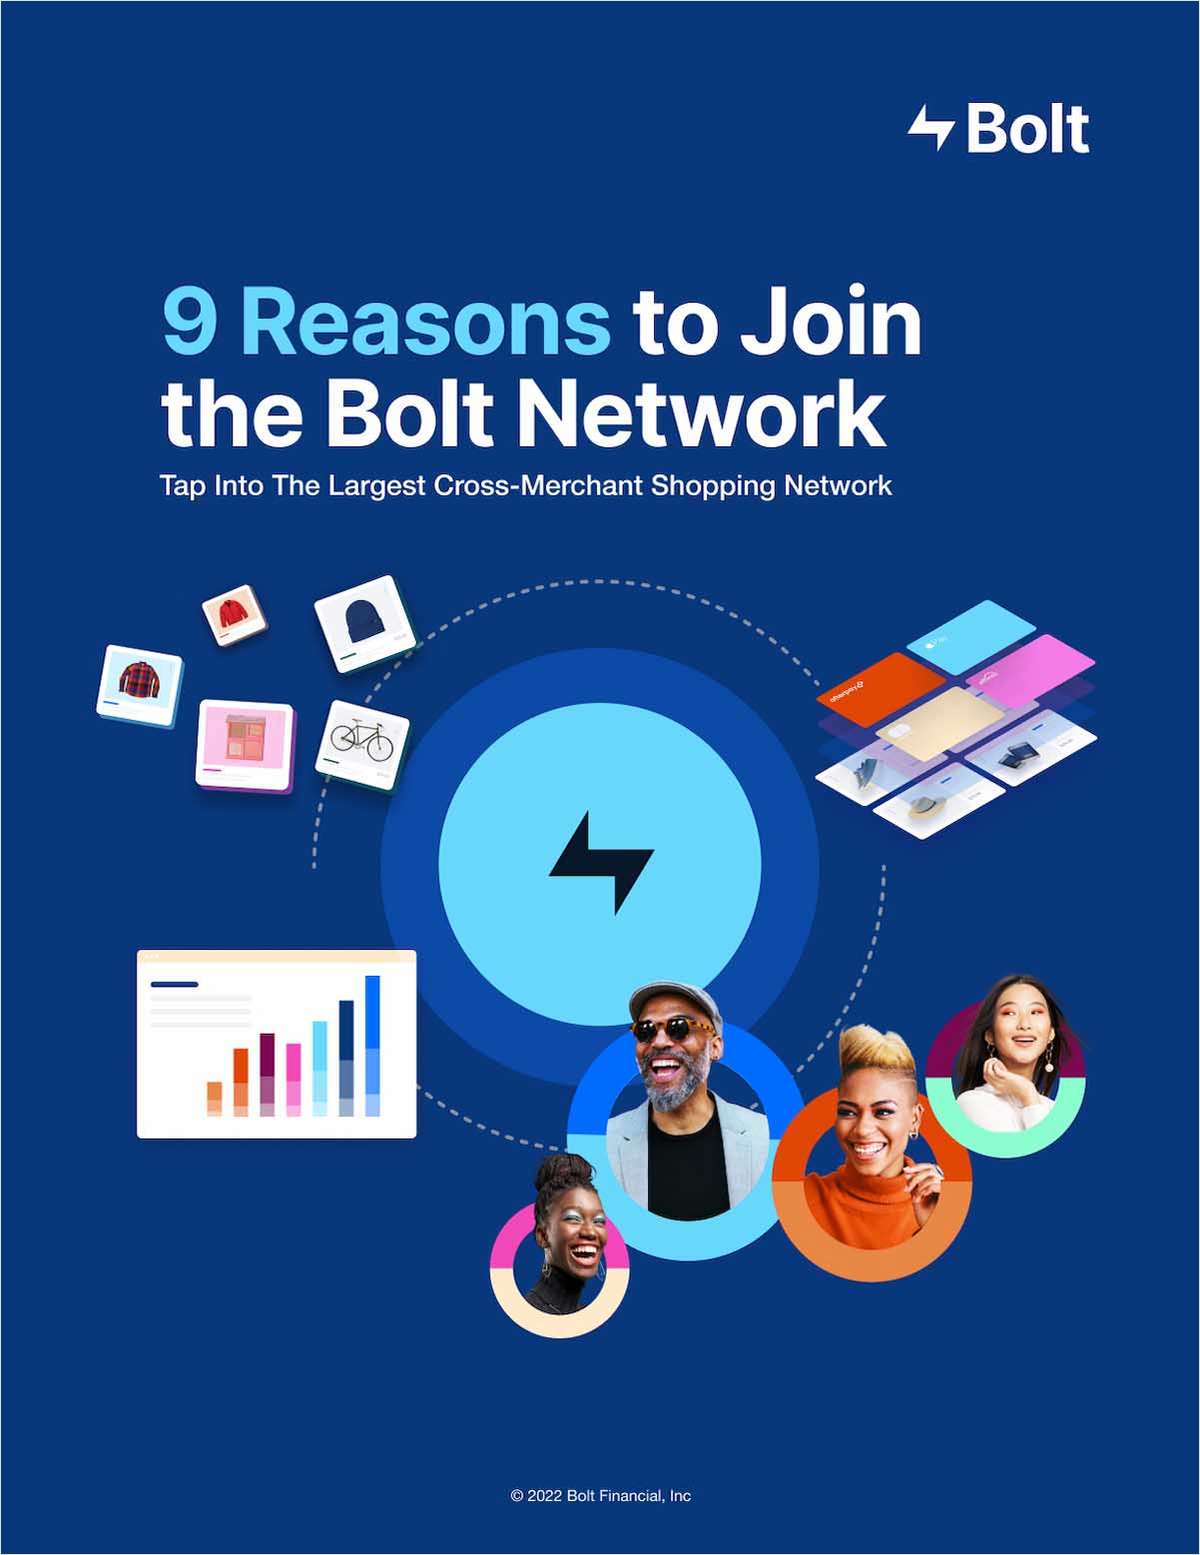 9 Reasons to Join the Bolt Network